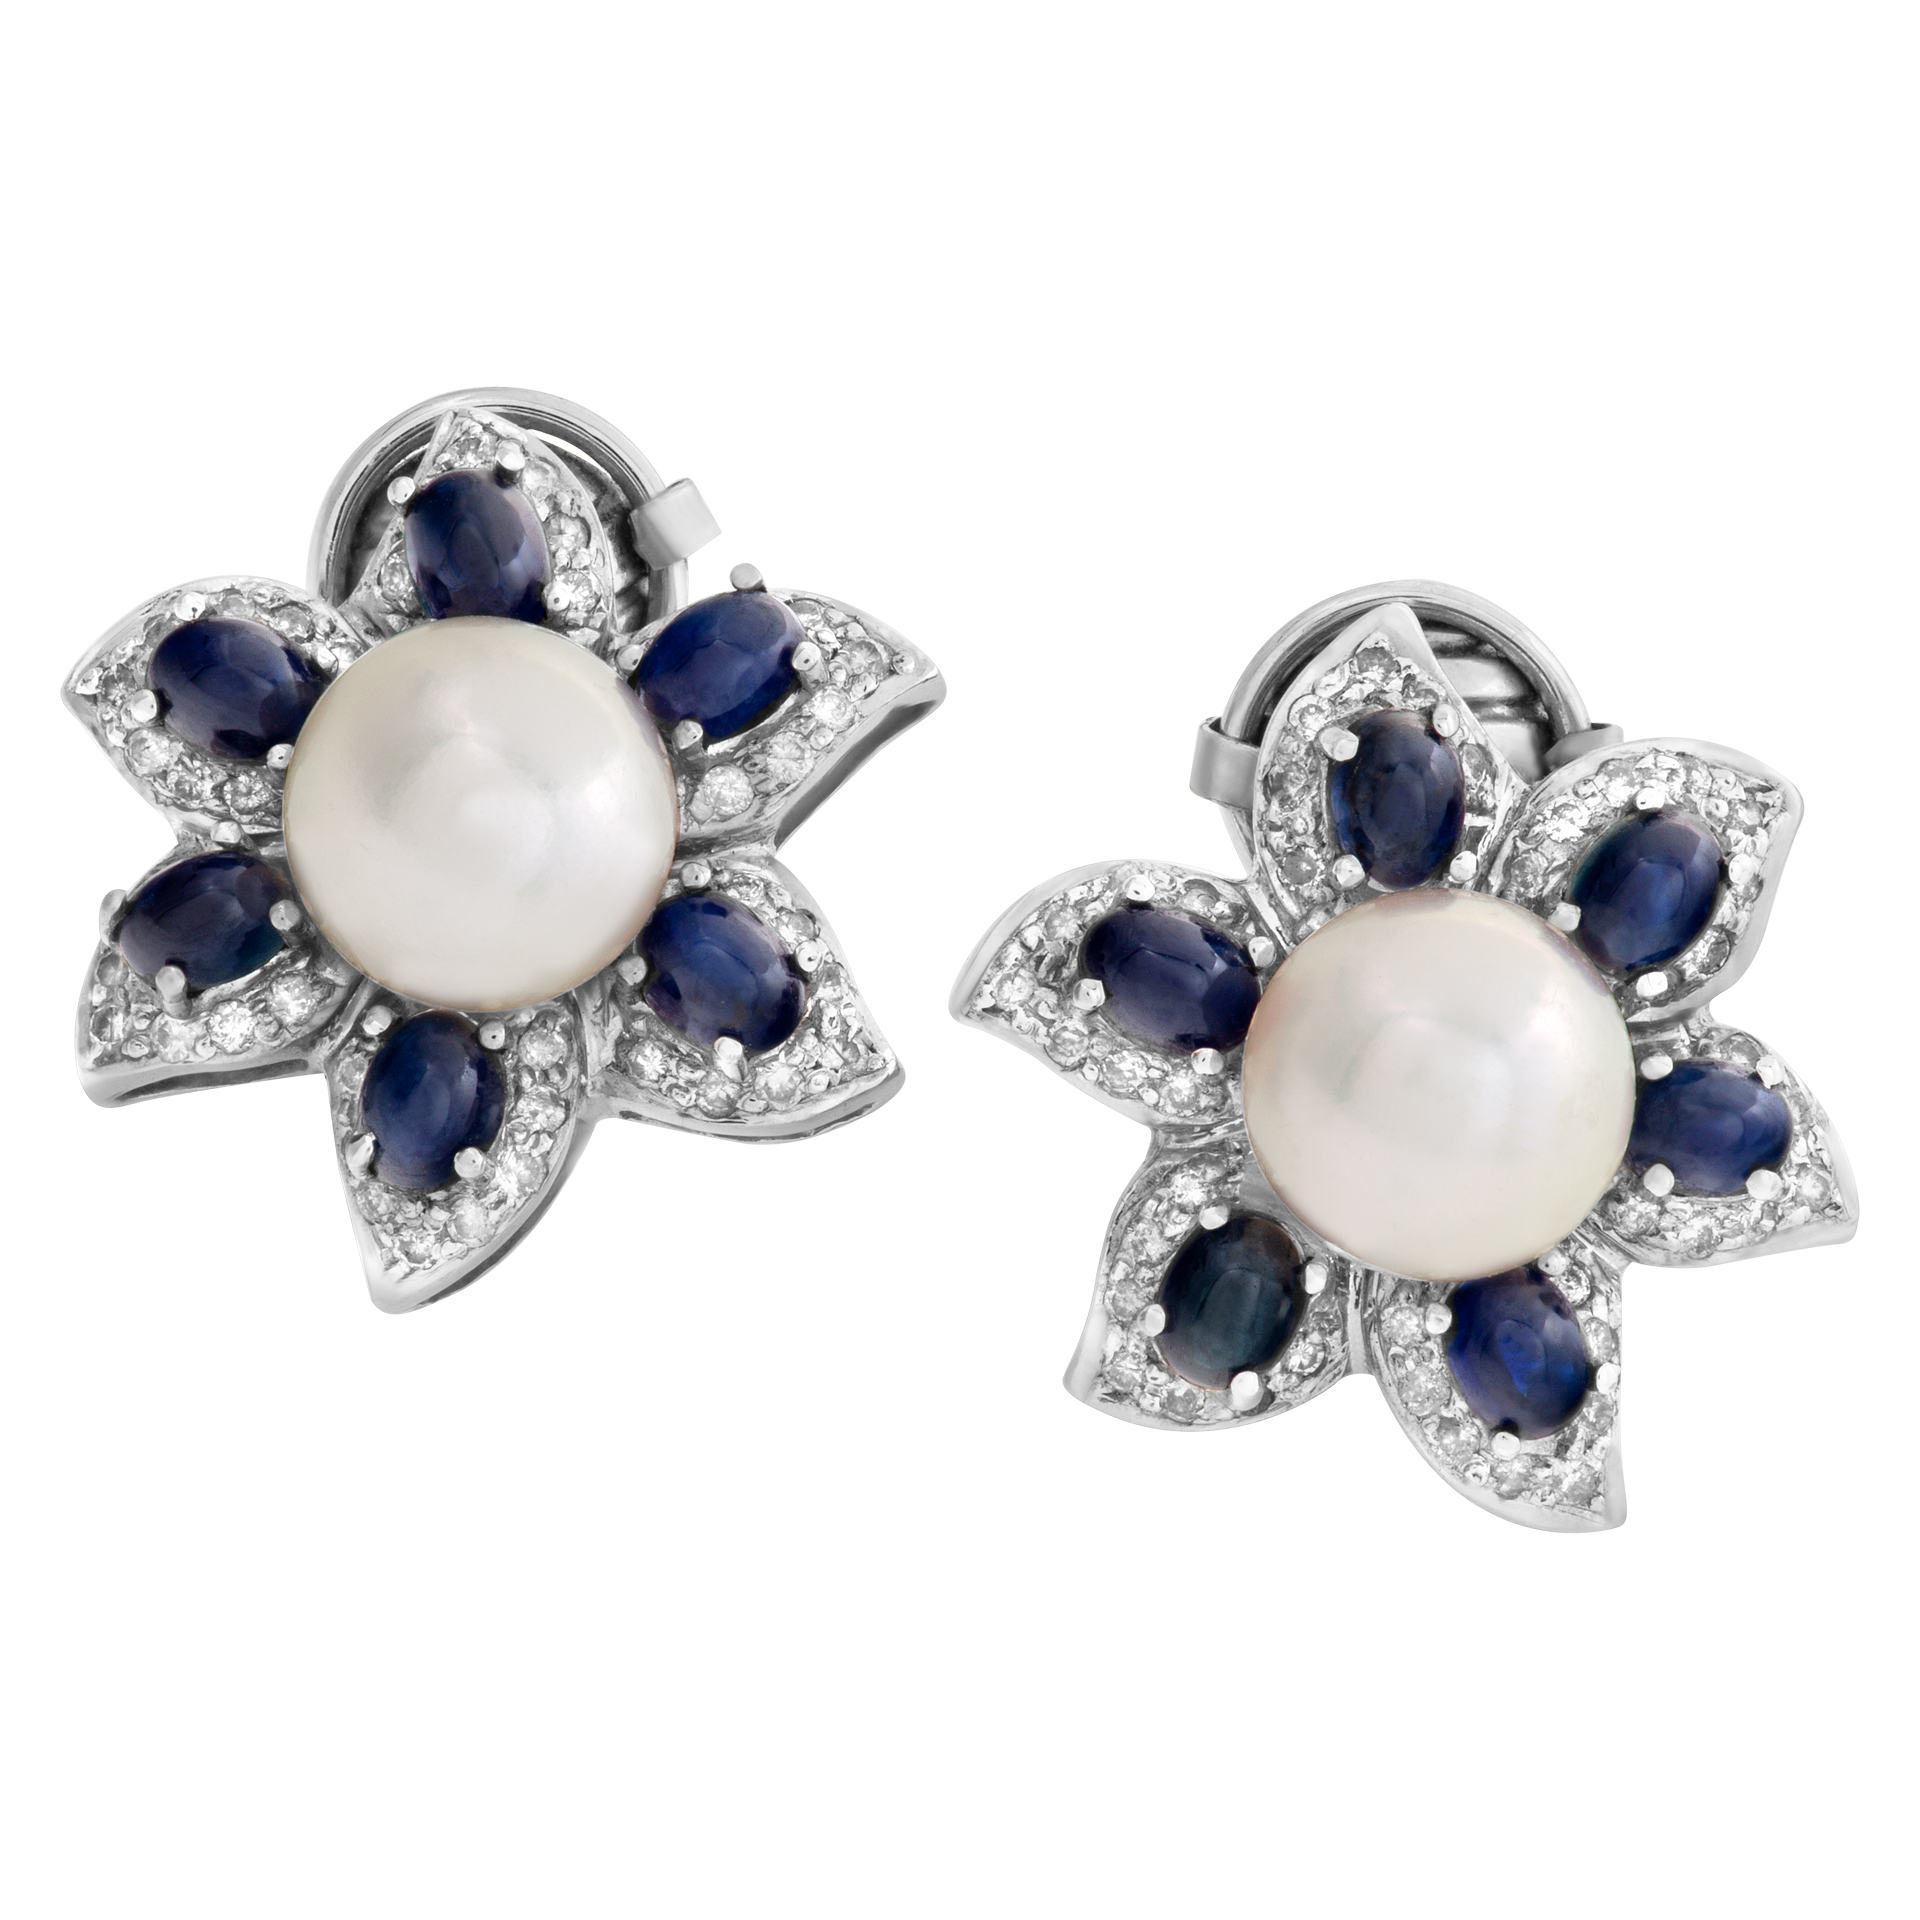 Flower design earrings in 14k white gold with sapphires, diamonds and pearls. image 1